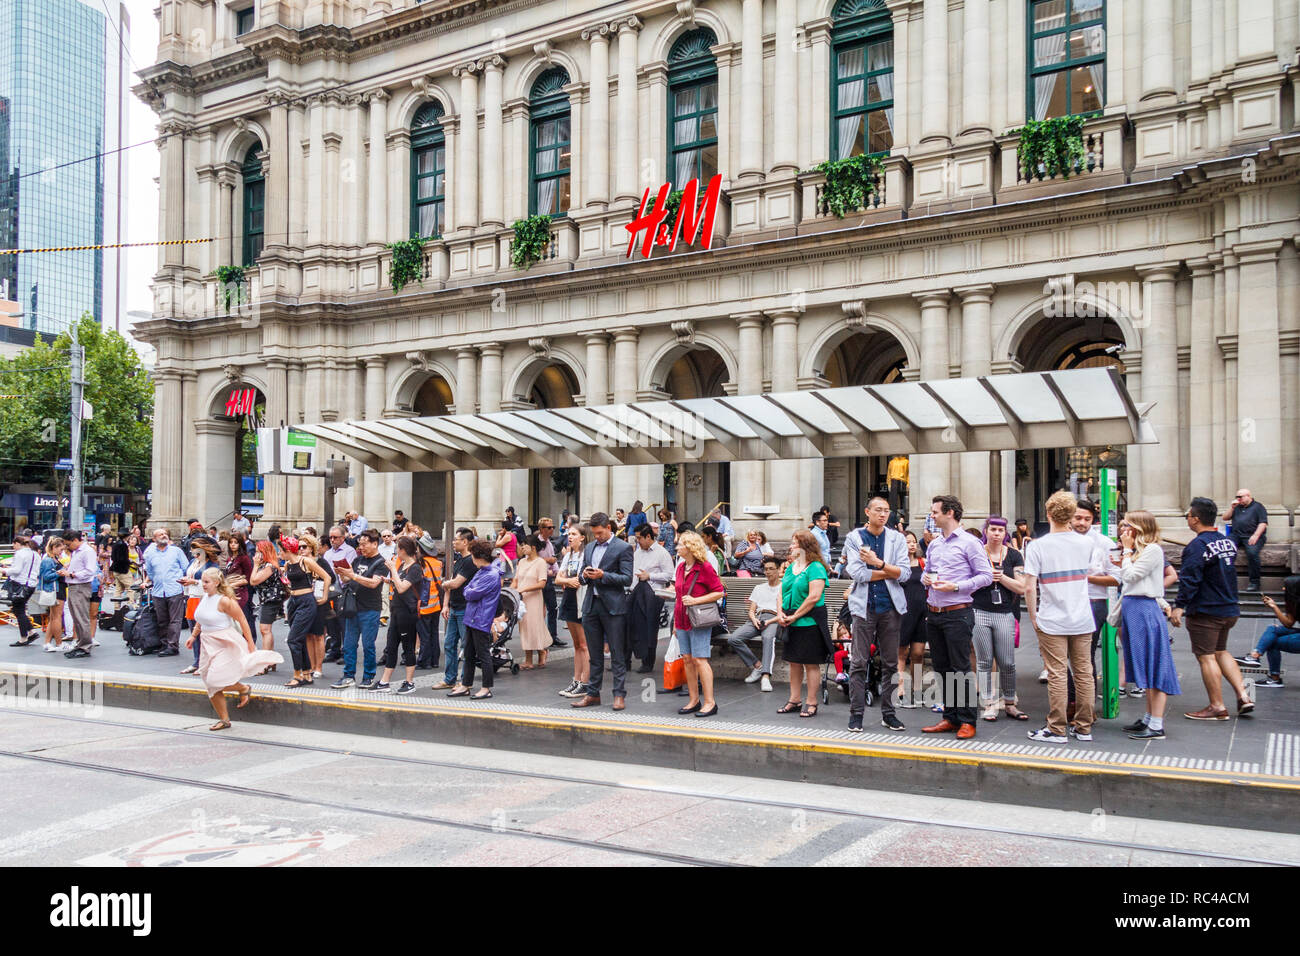 Melbourne, Australia - 21st February 2018: People waiting for the tram on Bourke Street outside the Old Post Office. The street is in the heart of the Stock Photo